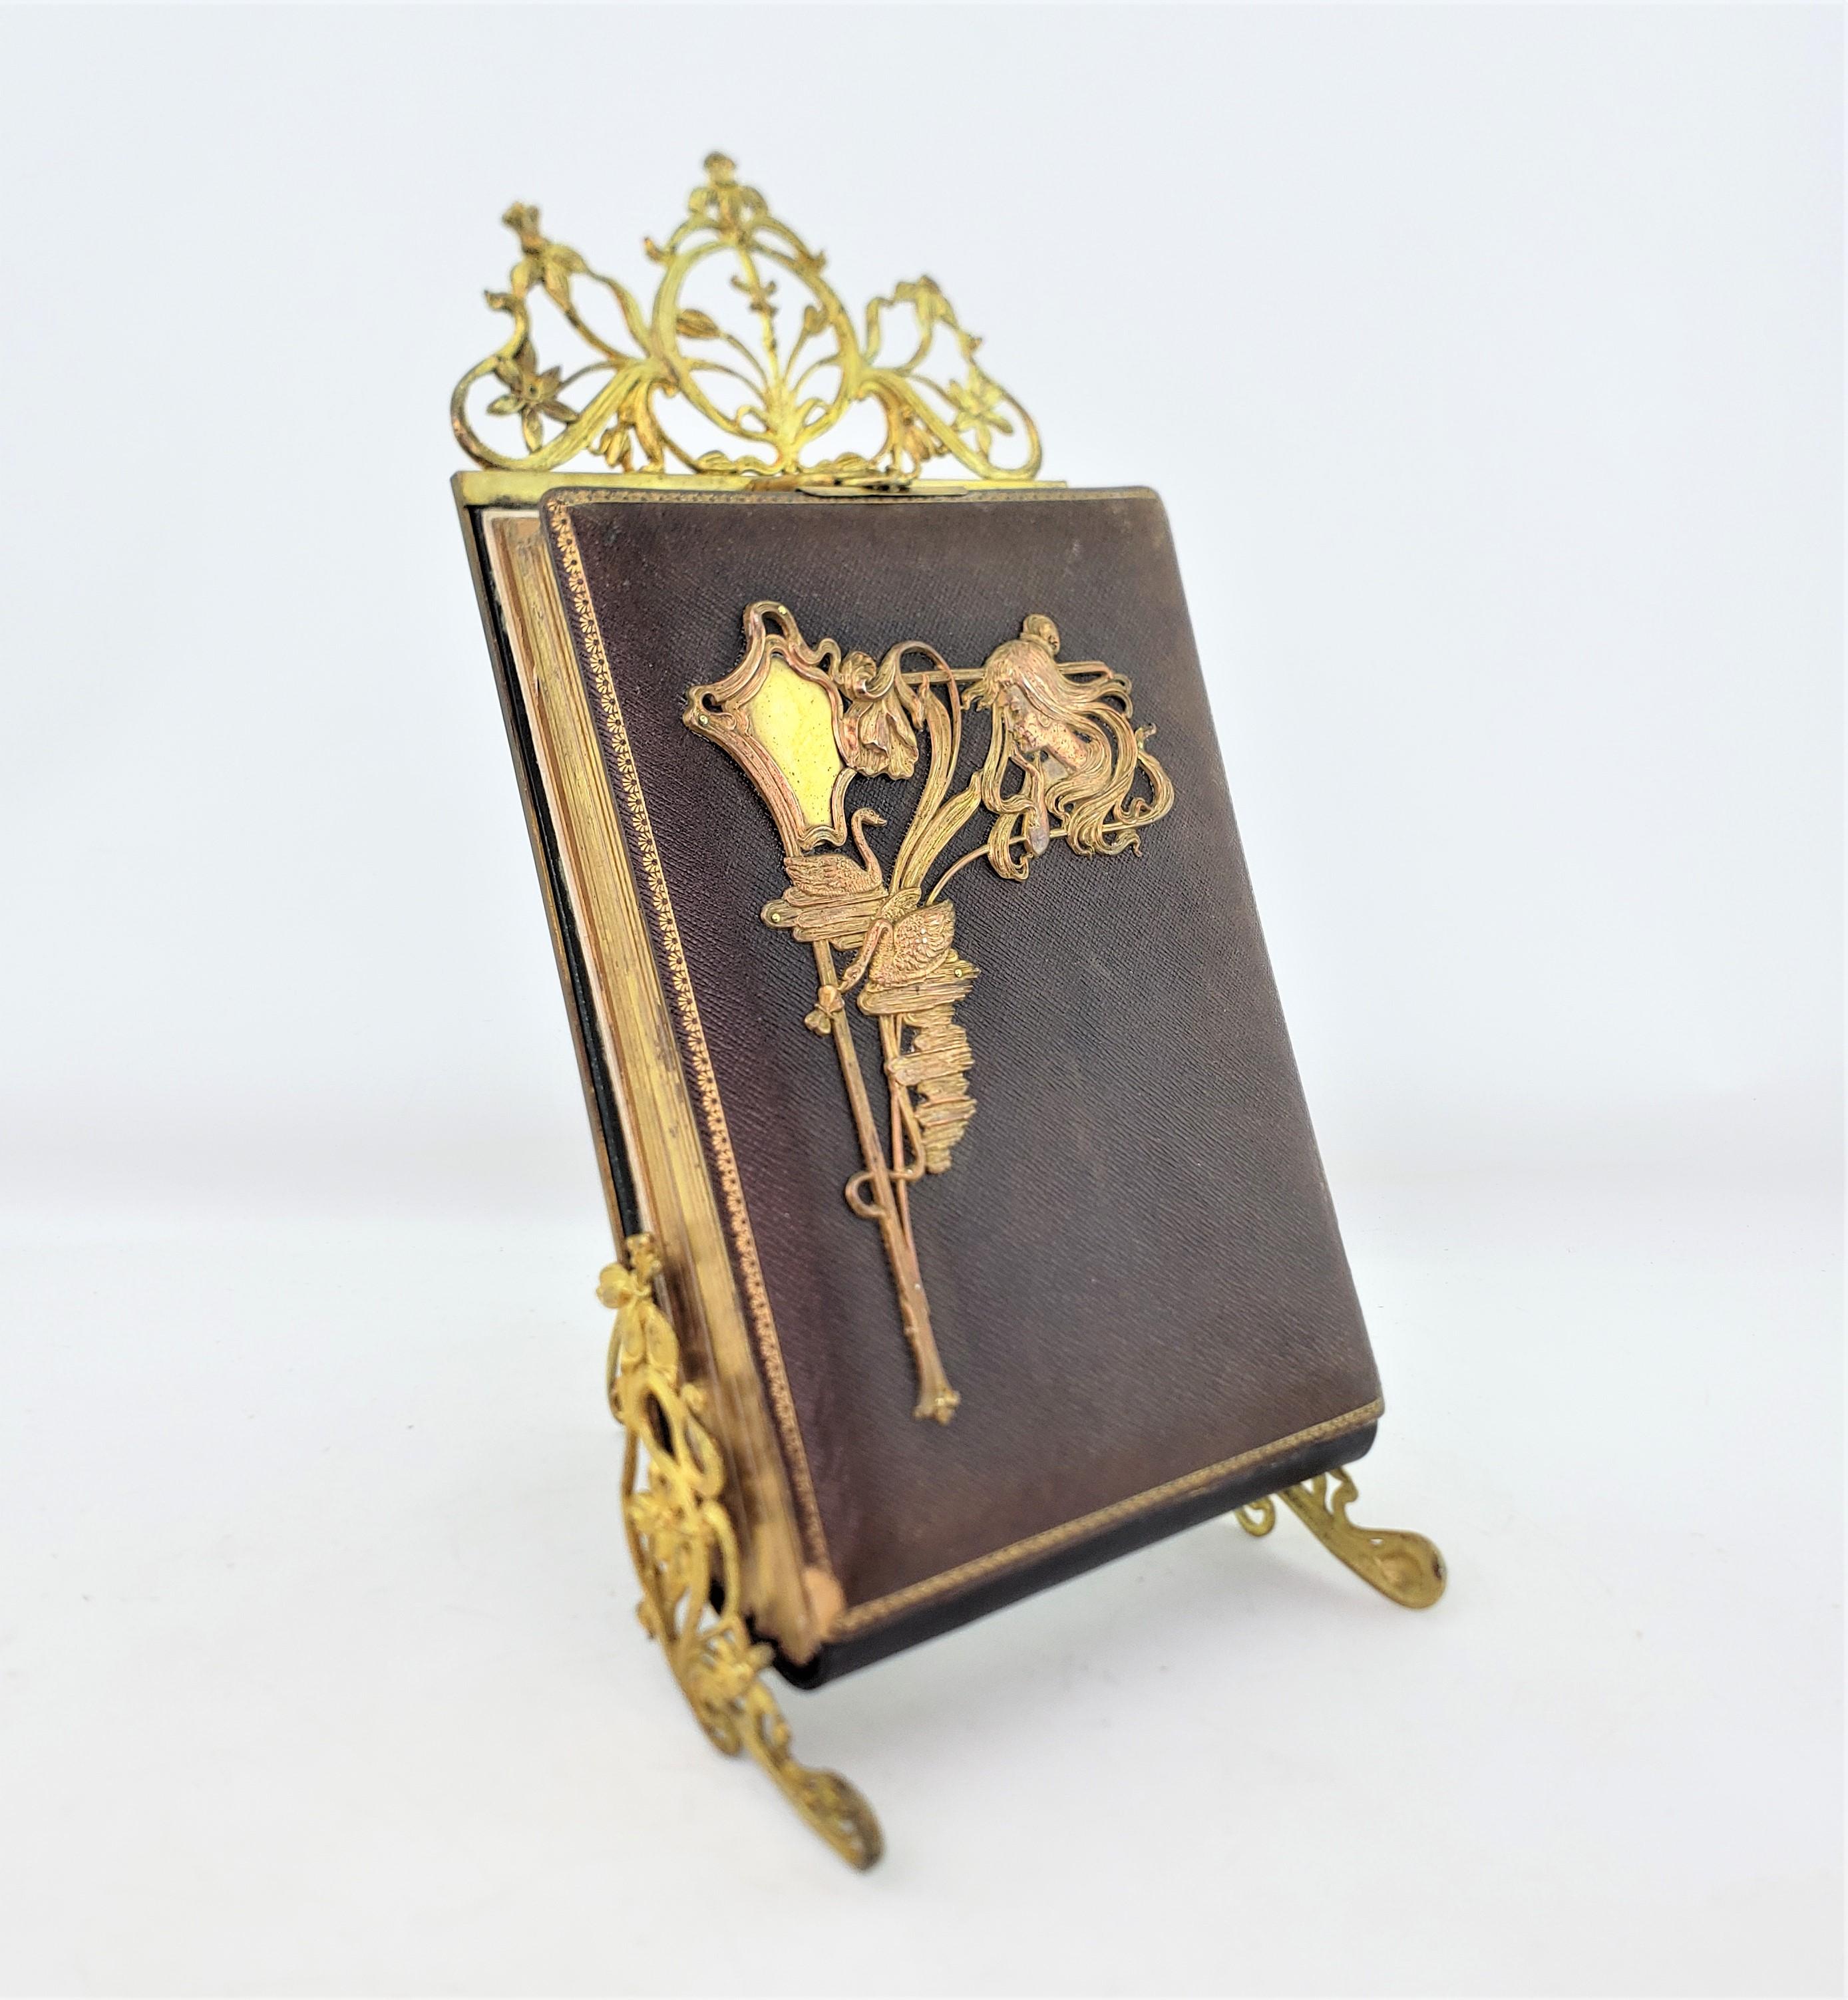 This antique standing photo album is unsigned, but presumed to have originated from France and date to approximately 1900 and done in the period Art Nouveau style. The album is composed of thick cardboard stock with printed floral decoration around